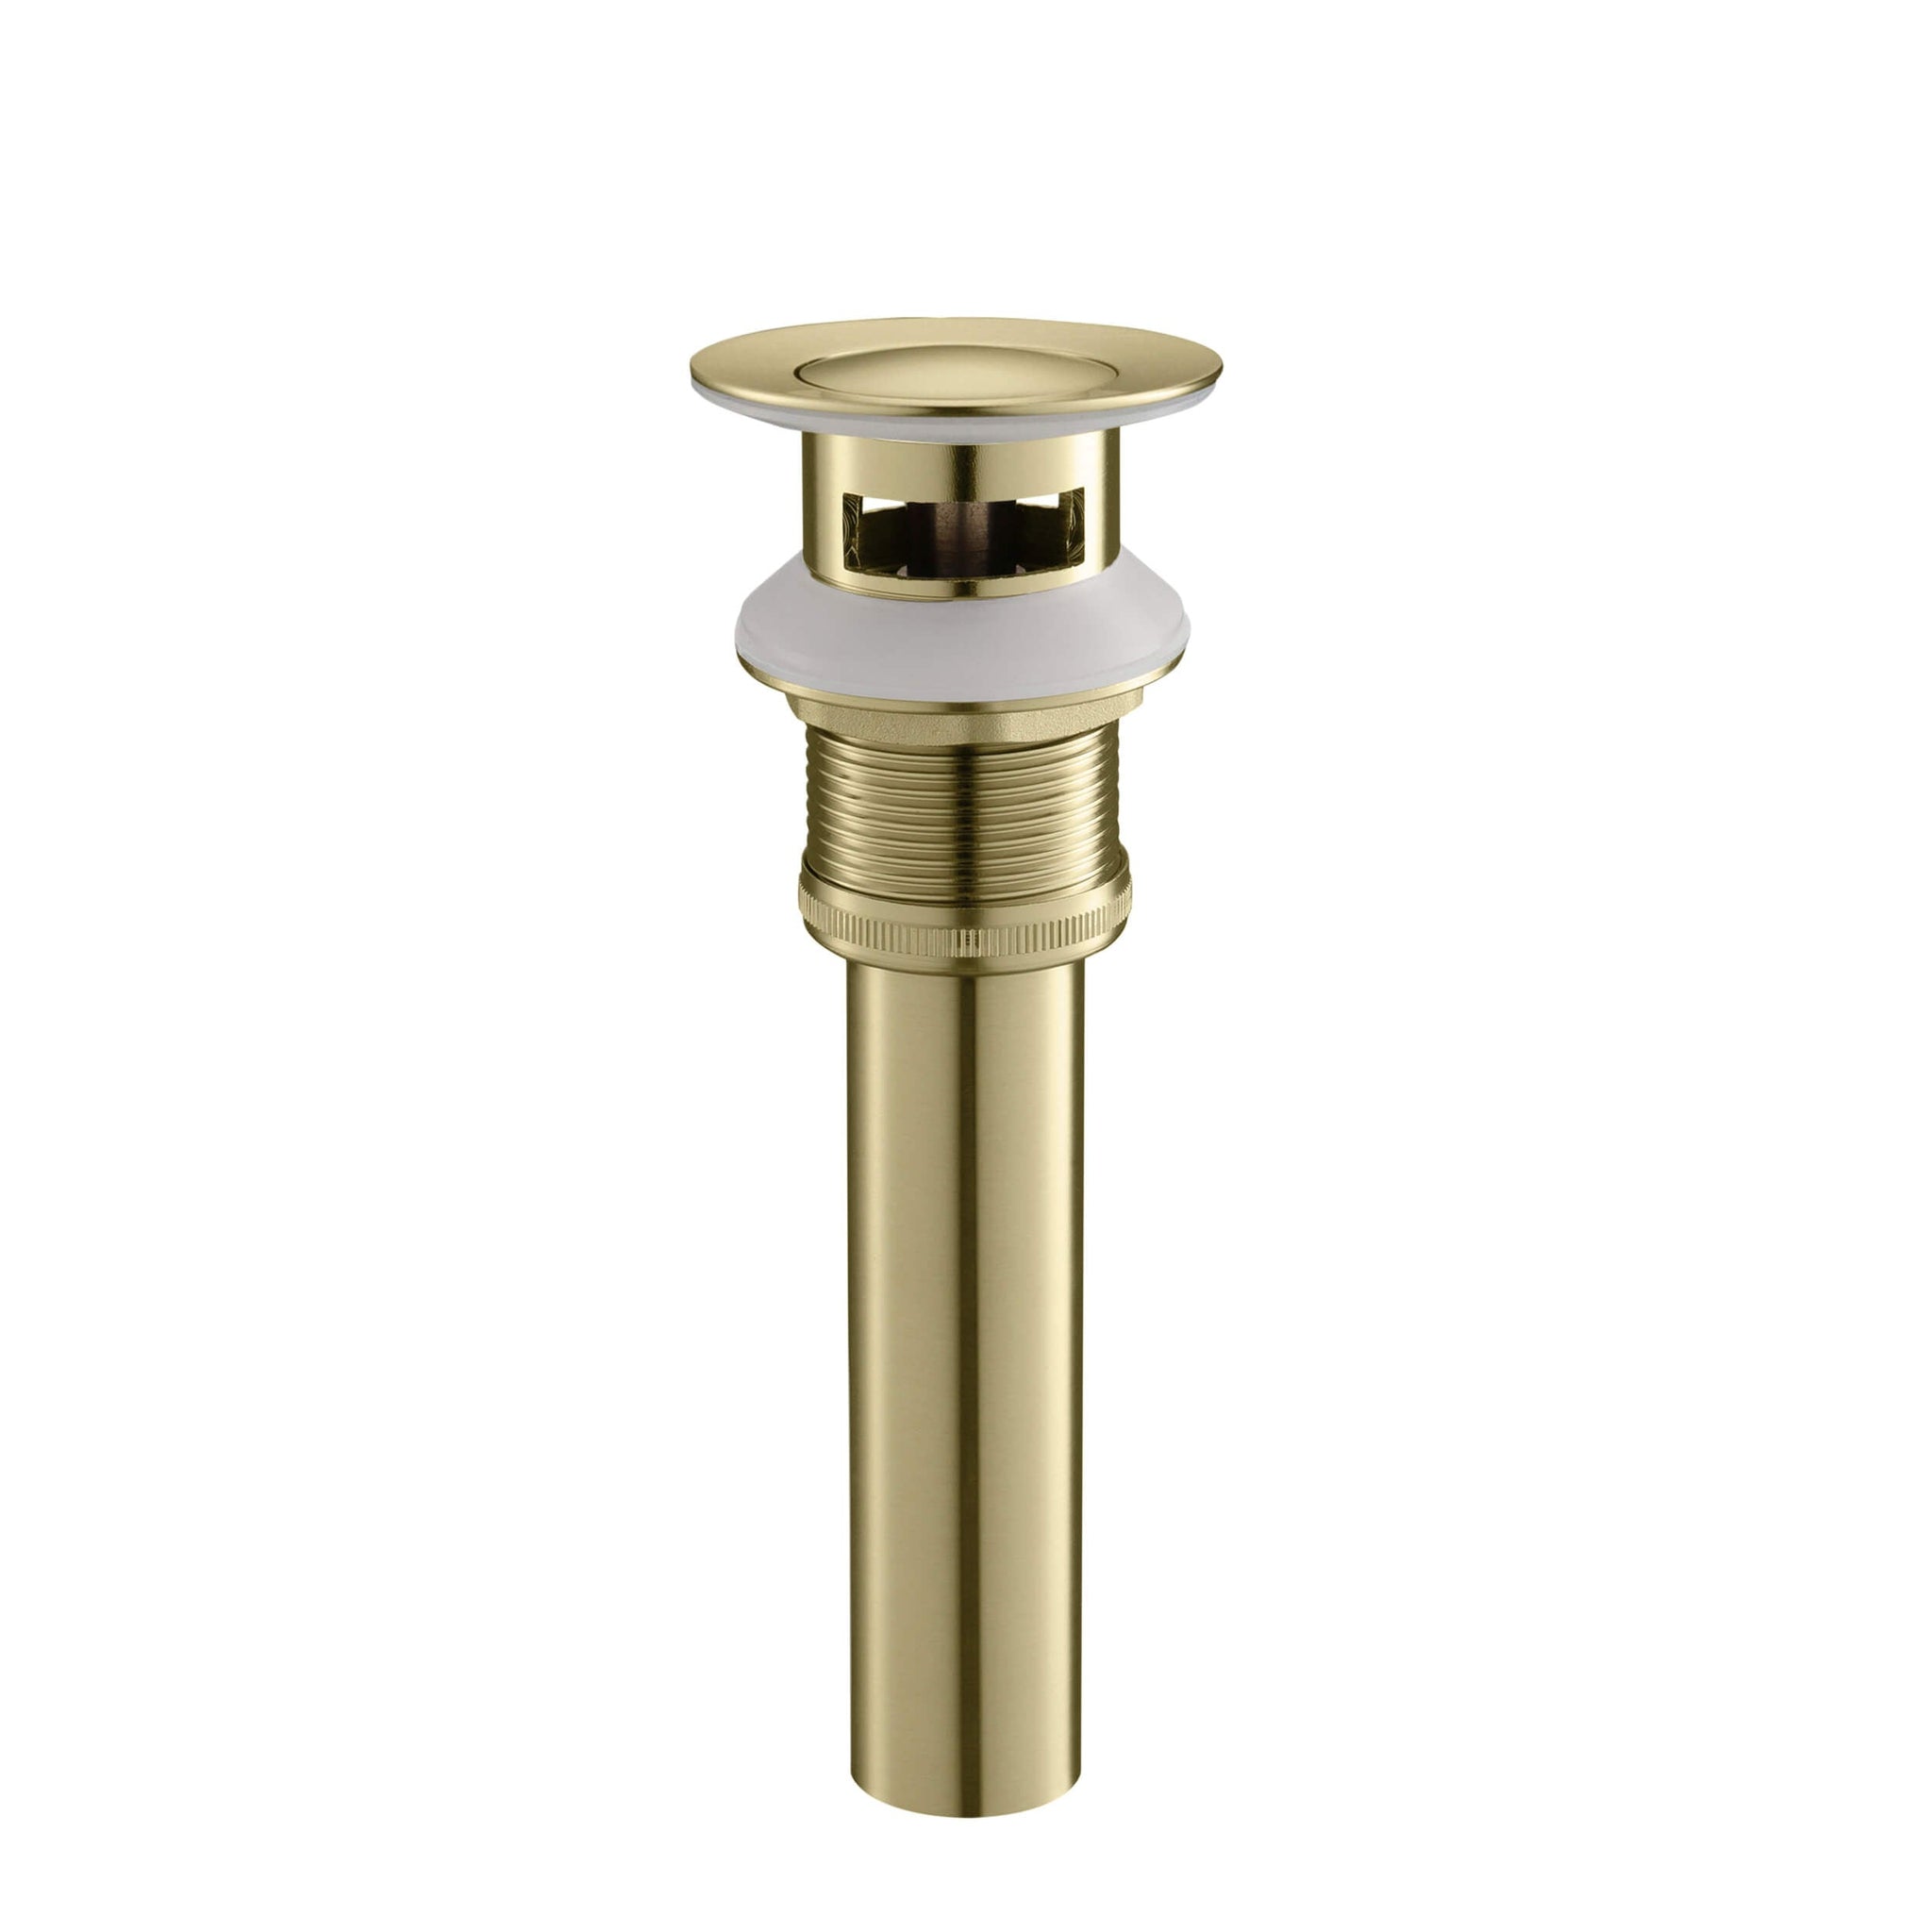 KIBI, KIBI Brass Bathroom Sink Pop-Up Drain Stopper Small Cover With Overflow in Brushed Gold Finish